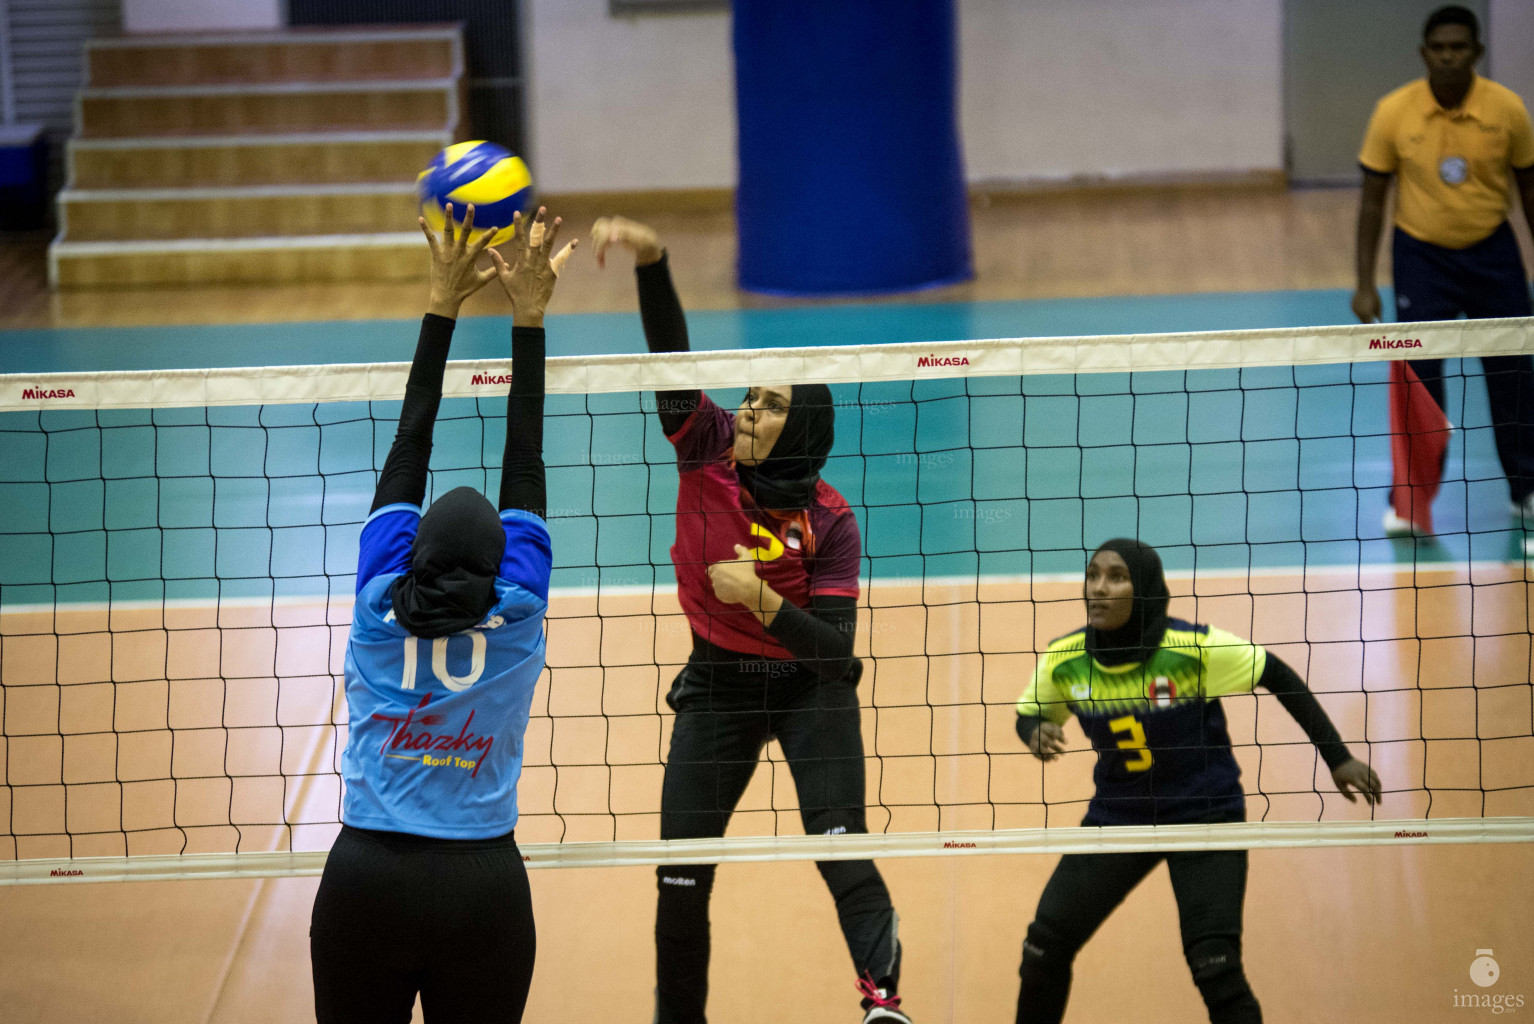 Police Club vs Lorenzo in Association Cup 2019 (Women's Division), 27th January 2019, Sunday Photos: Ismail Thoriq / images.mv